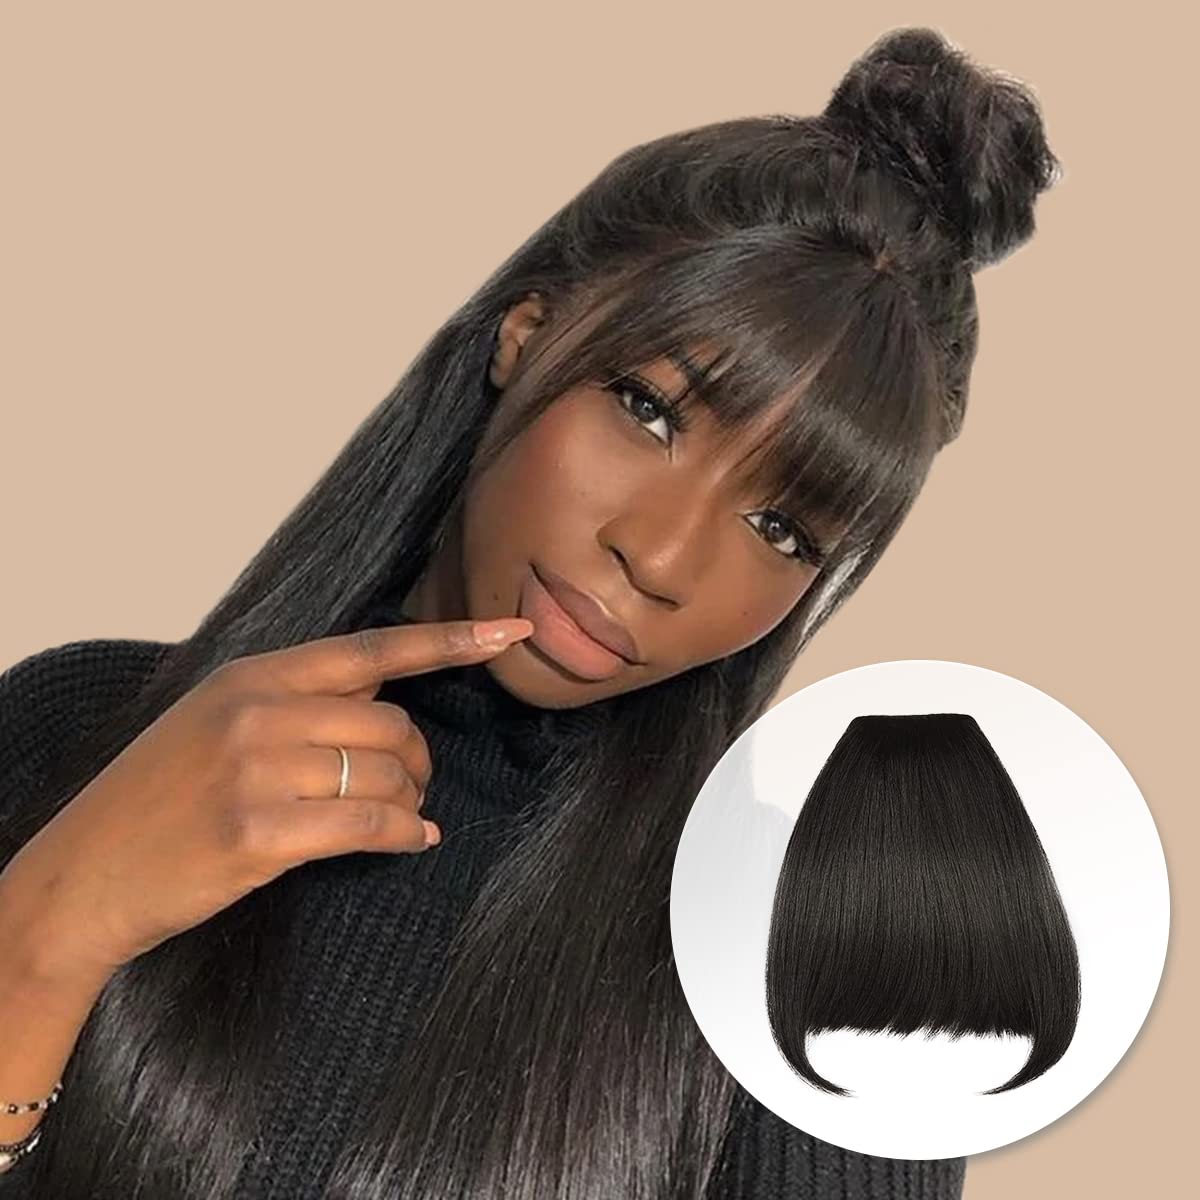 Instant Glitz Bangs Hair Clip In Bangs Clip on Bangs Sweet Bangs Fringe Bang Synthetic Hair Piece Hair Extenstions for Women Sweet Bangs - Fringe Bang (2) Find Your New Look Today!